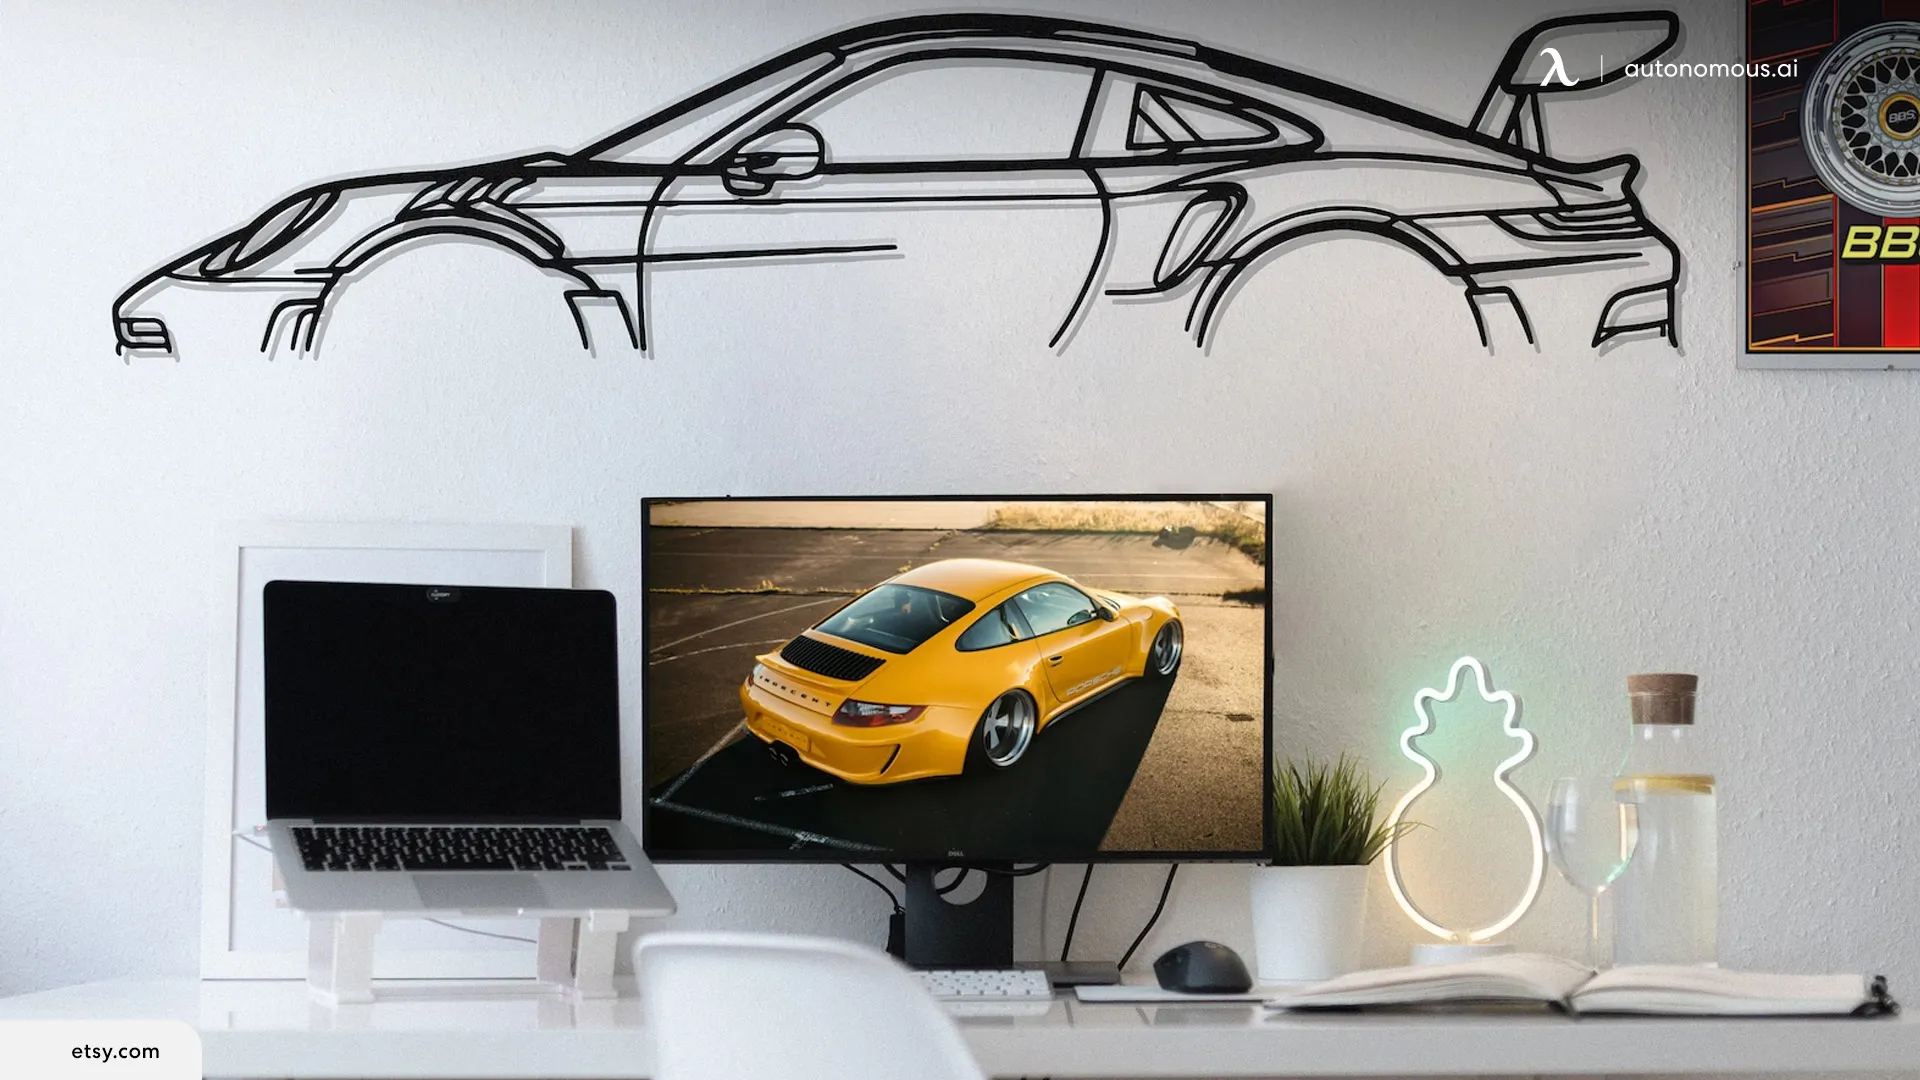 Eye-catching Car-Themed Decor Ideas for Automobile Enthusiasts